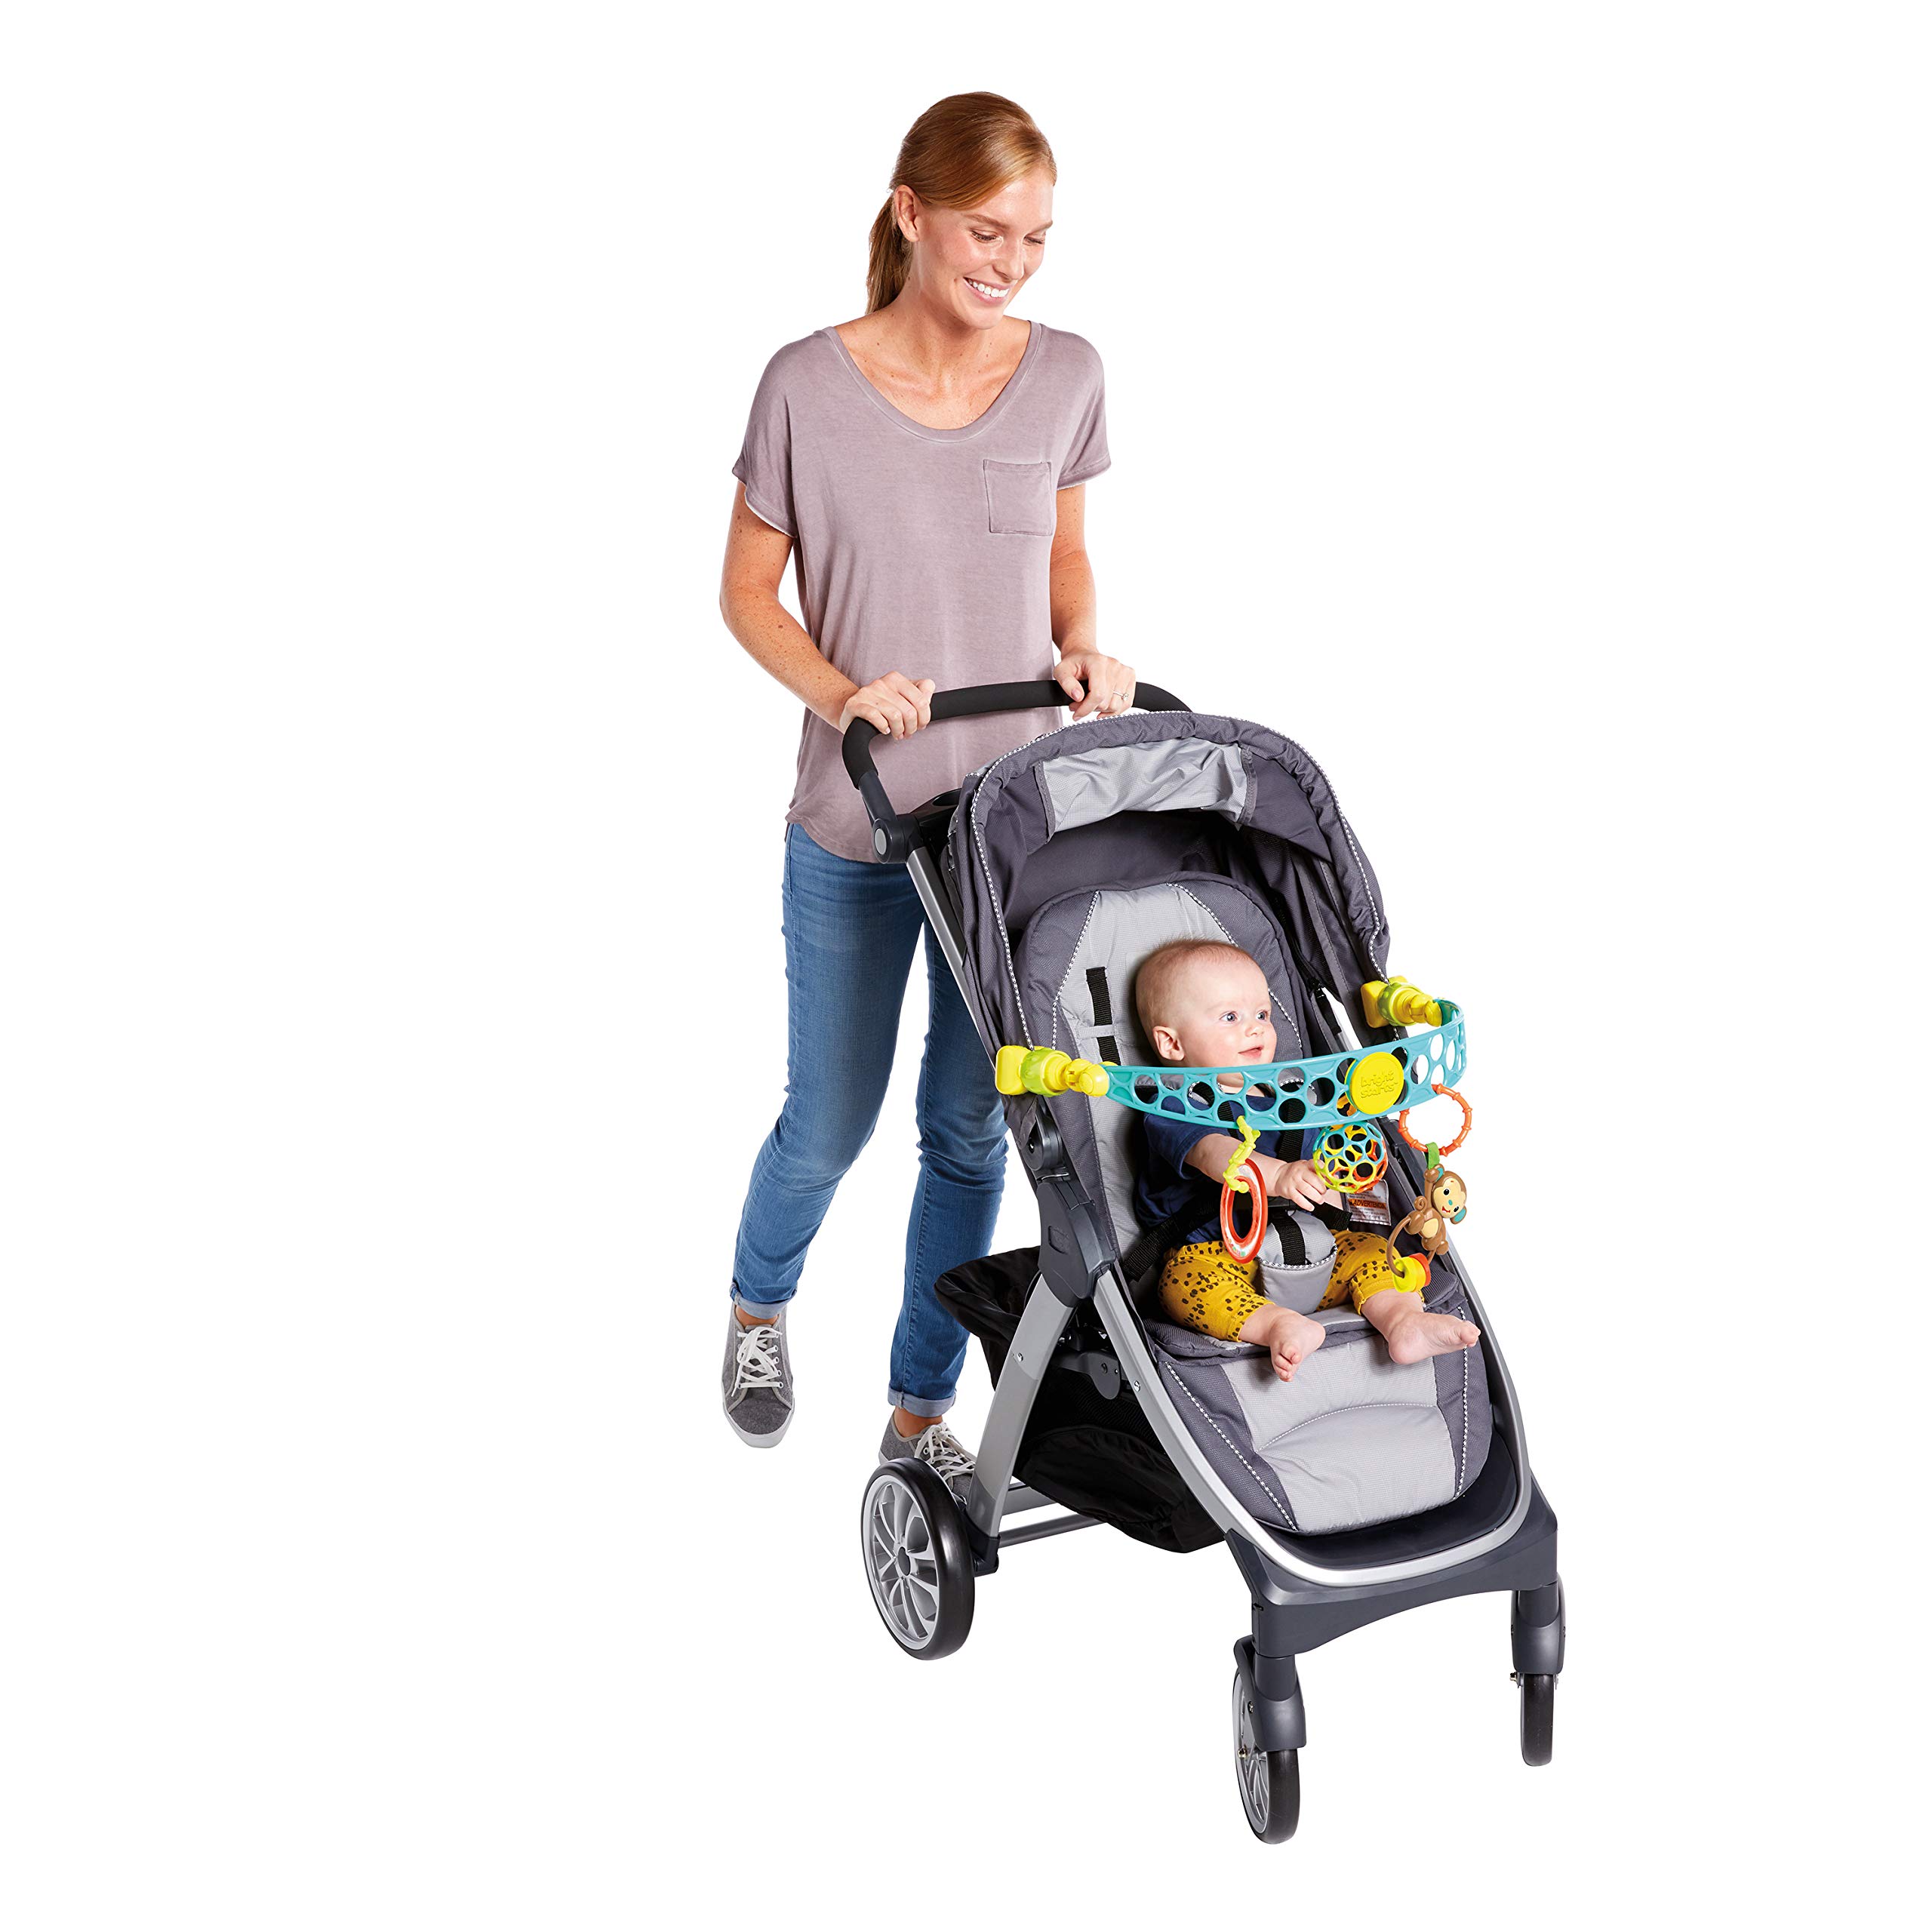 Bright Starts OBall Flex 'n Go Activity Arch Stroller or Carrier Take-Along Toy, Ages Newborn +